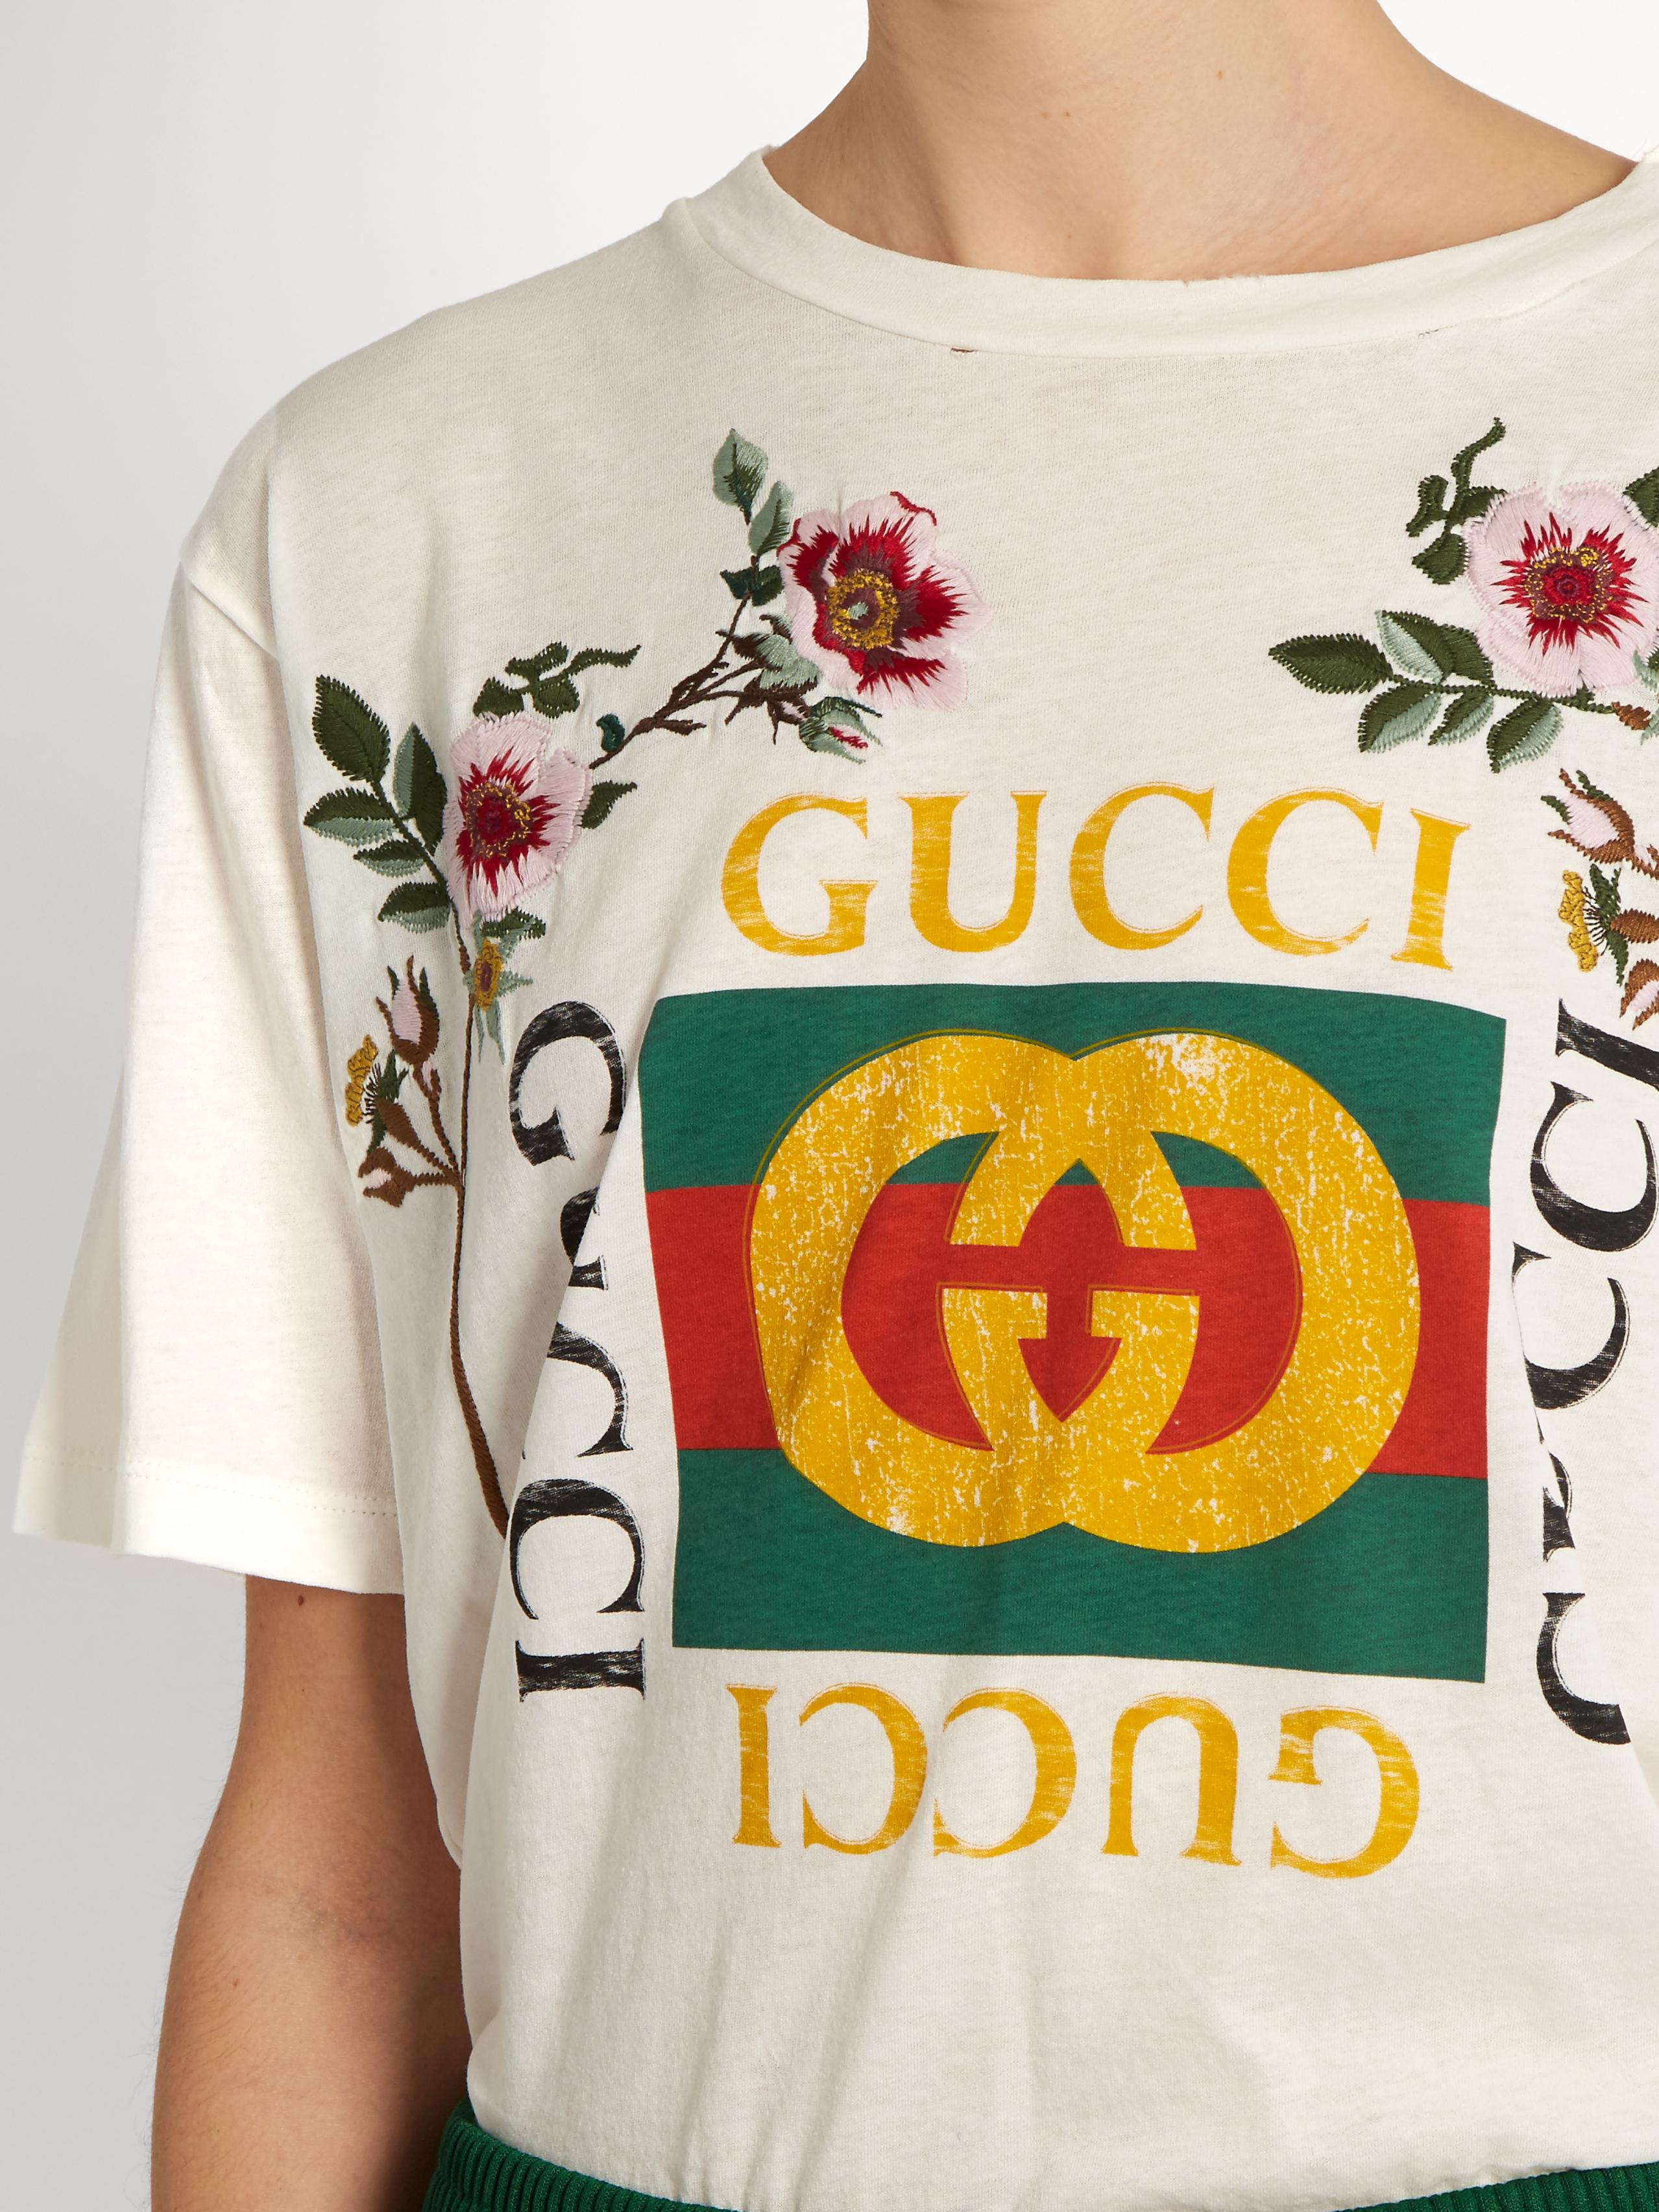 gucci embroidered t shirt